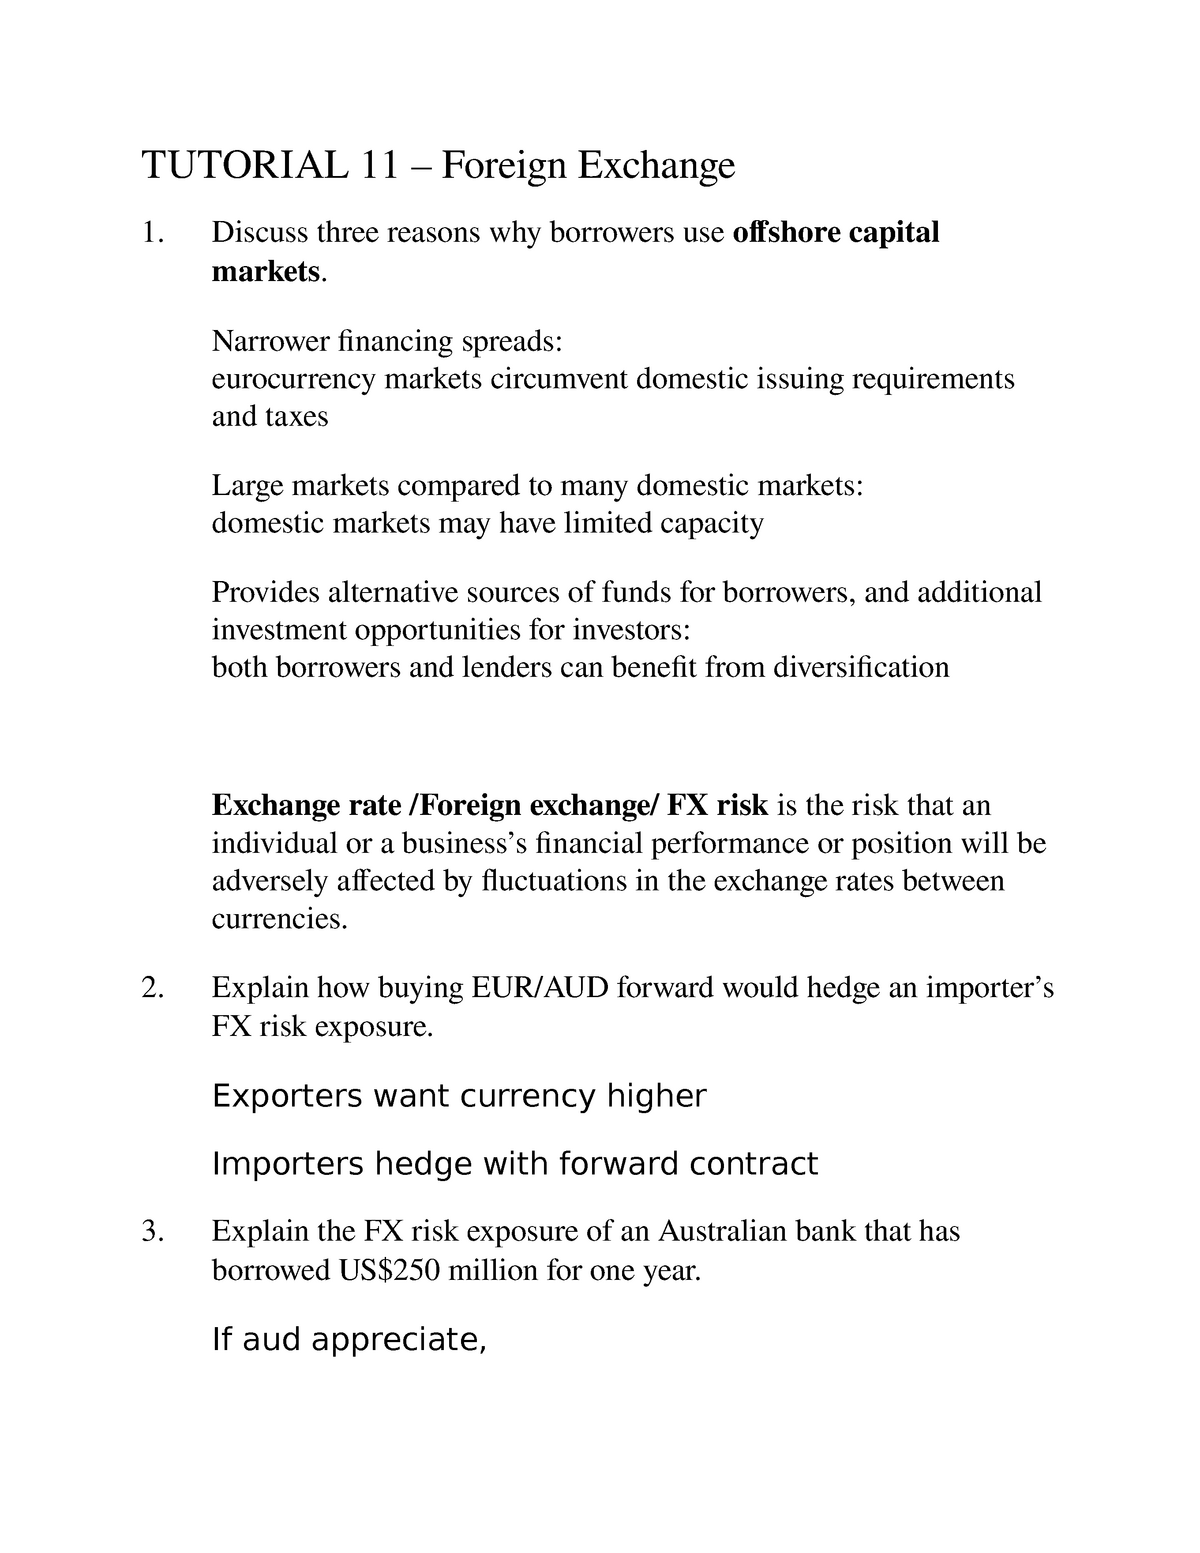 foreign exchange assignment questions